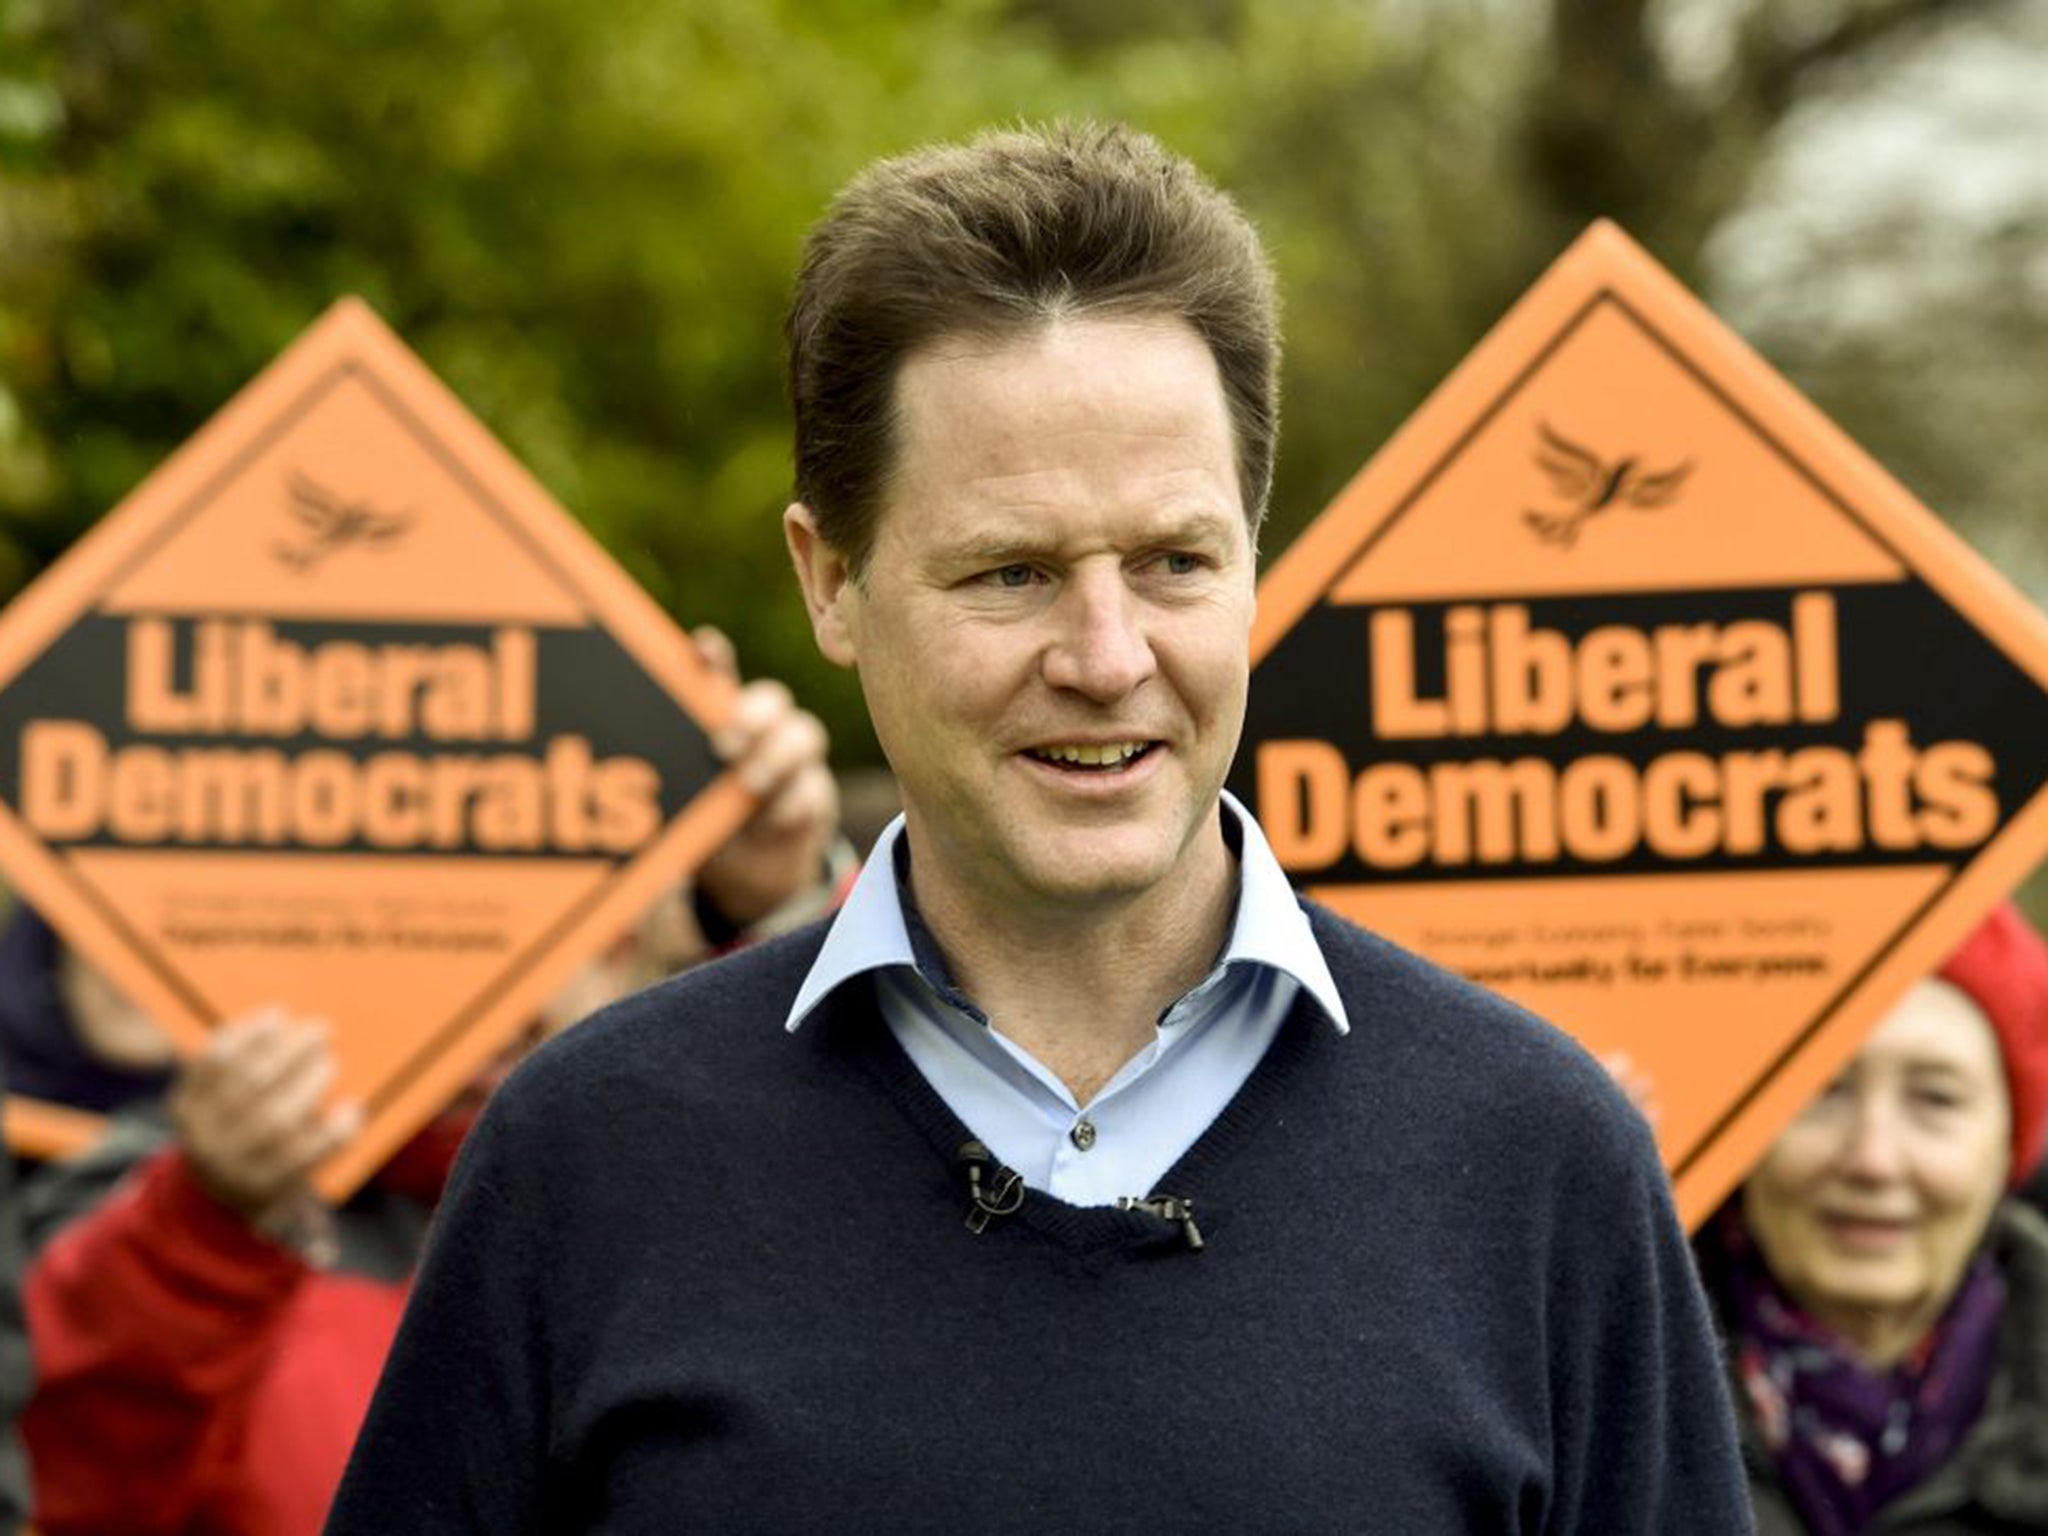 Clegg said: "I'm all for diversity, I'm all for school autonomy, I have been a great champion of giving teachers and headteachers greater autonomy."